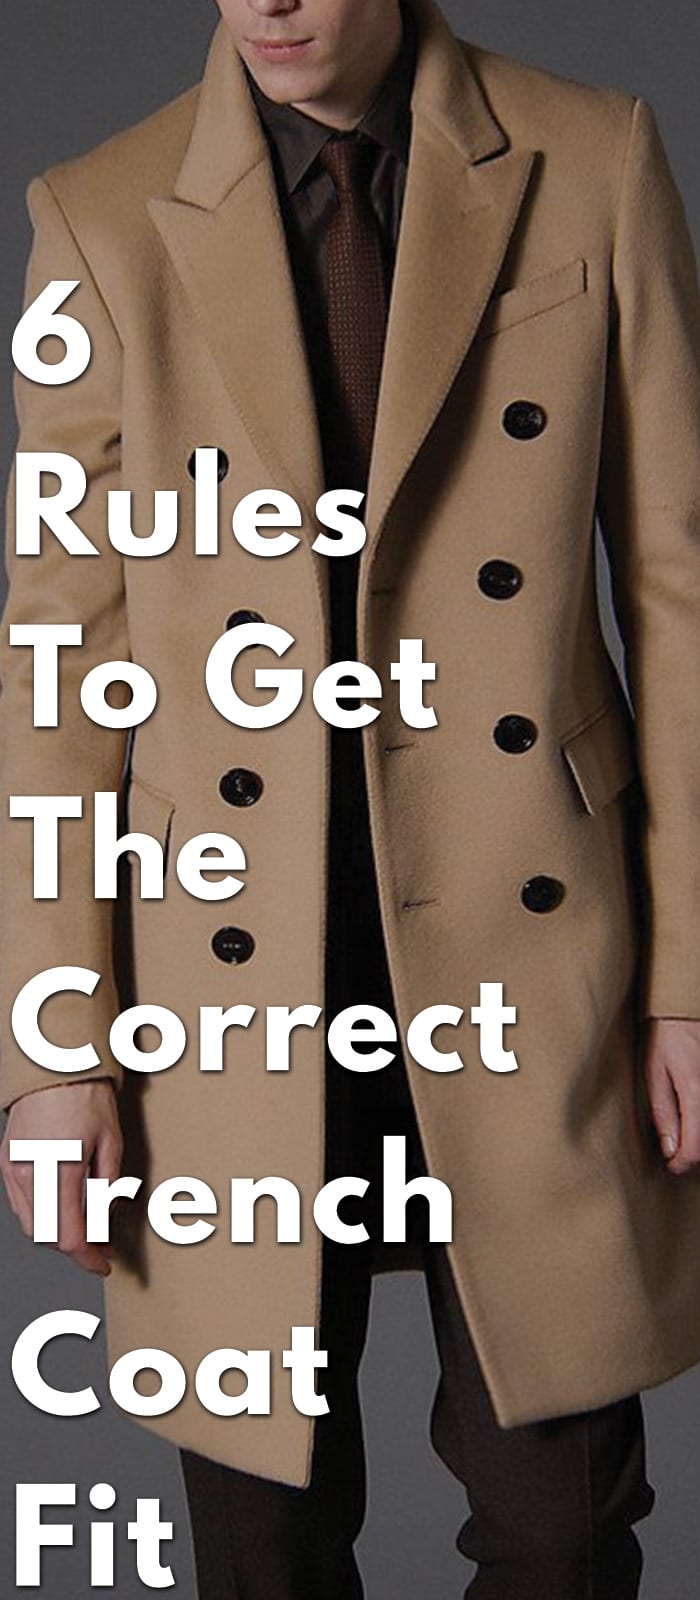 6-Rules-To-Get-The-Correct-Trench-Coat-Fit